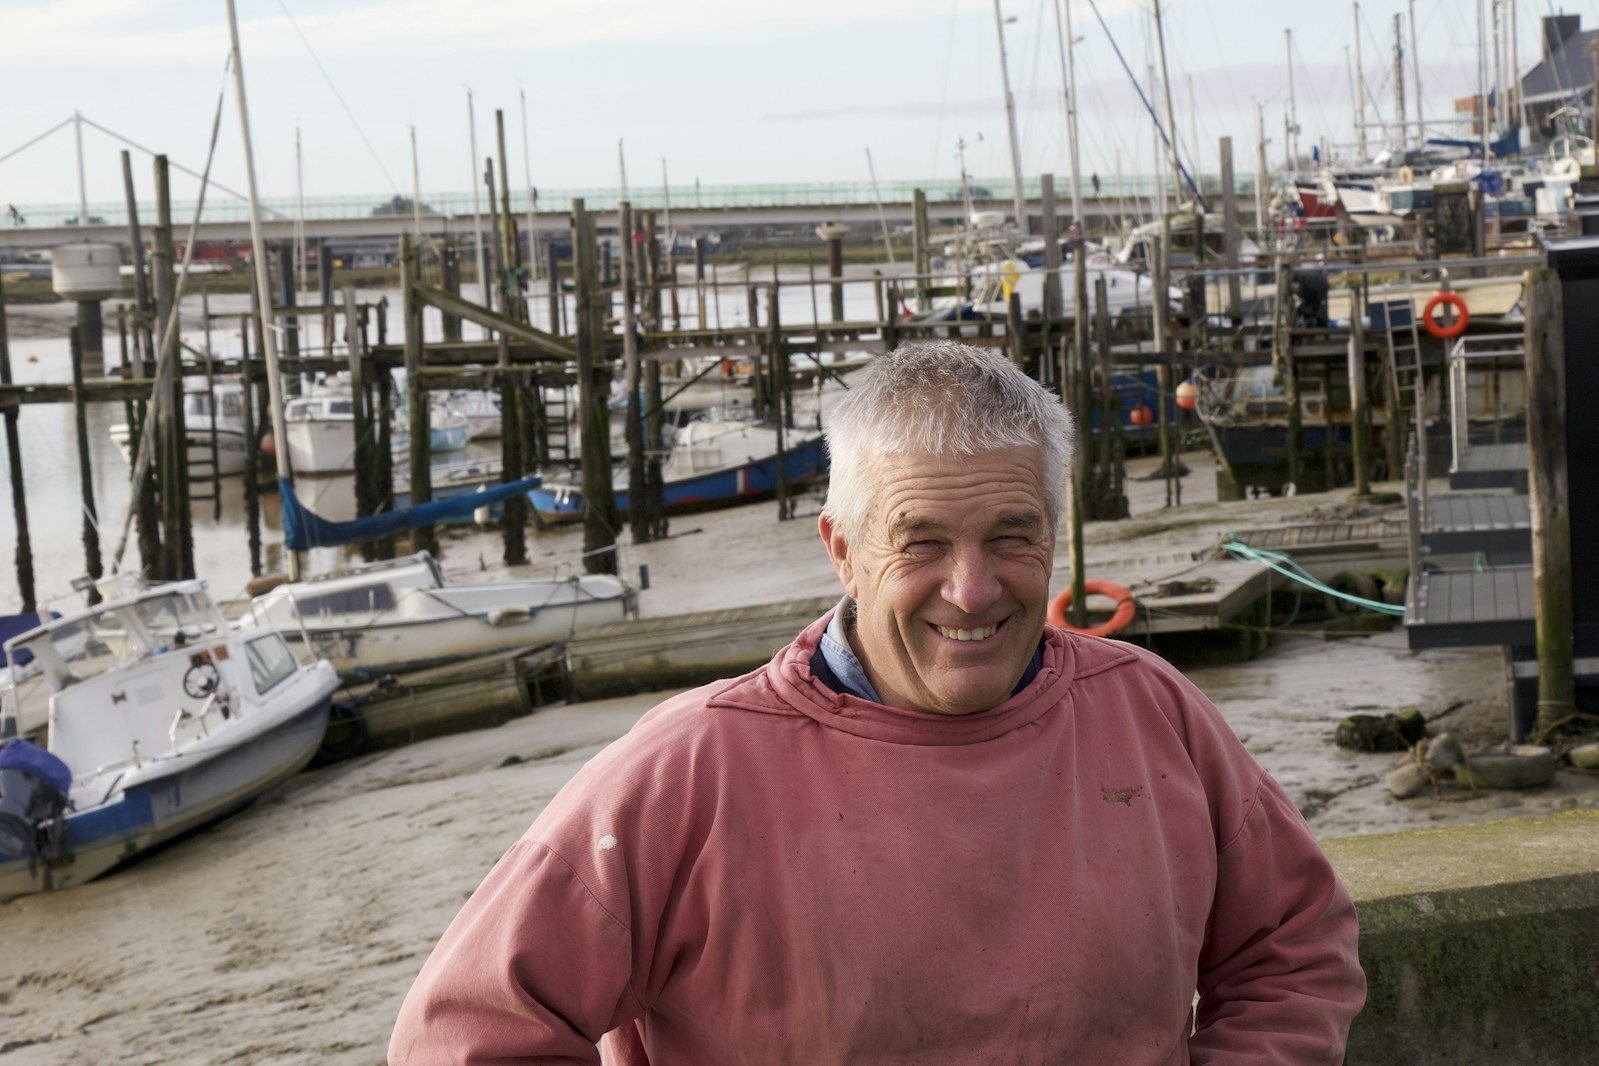 Fisherman Clive Mills standing by boats